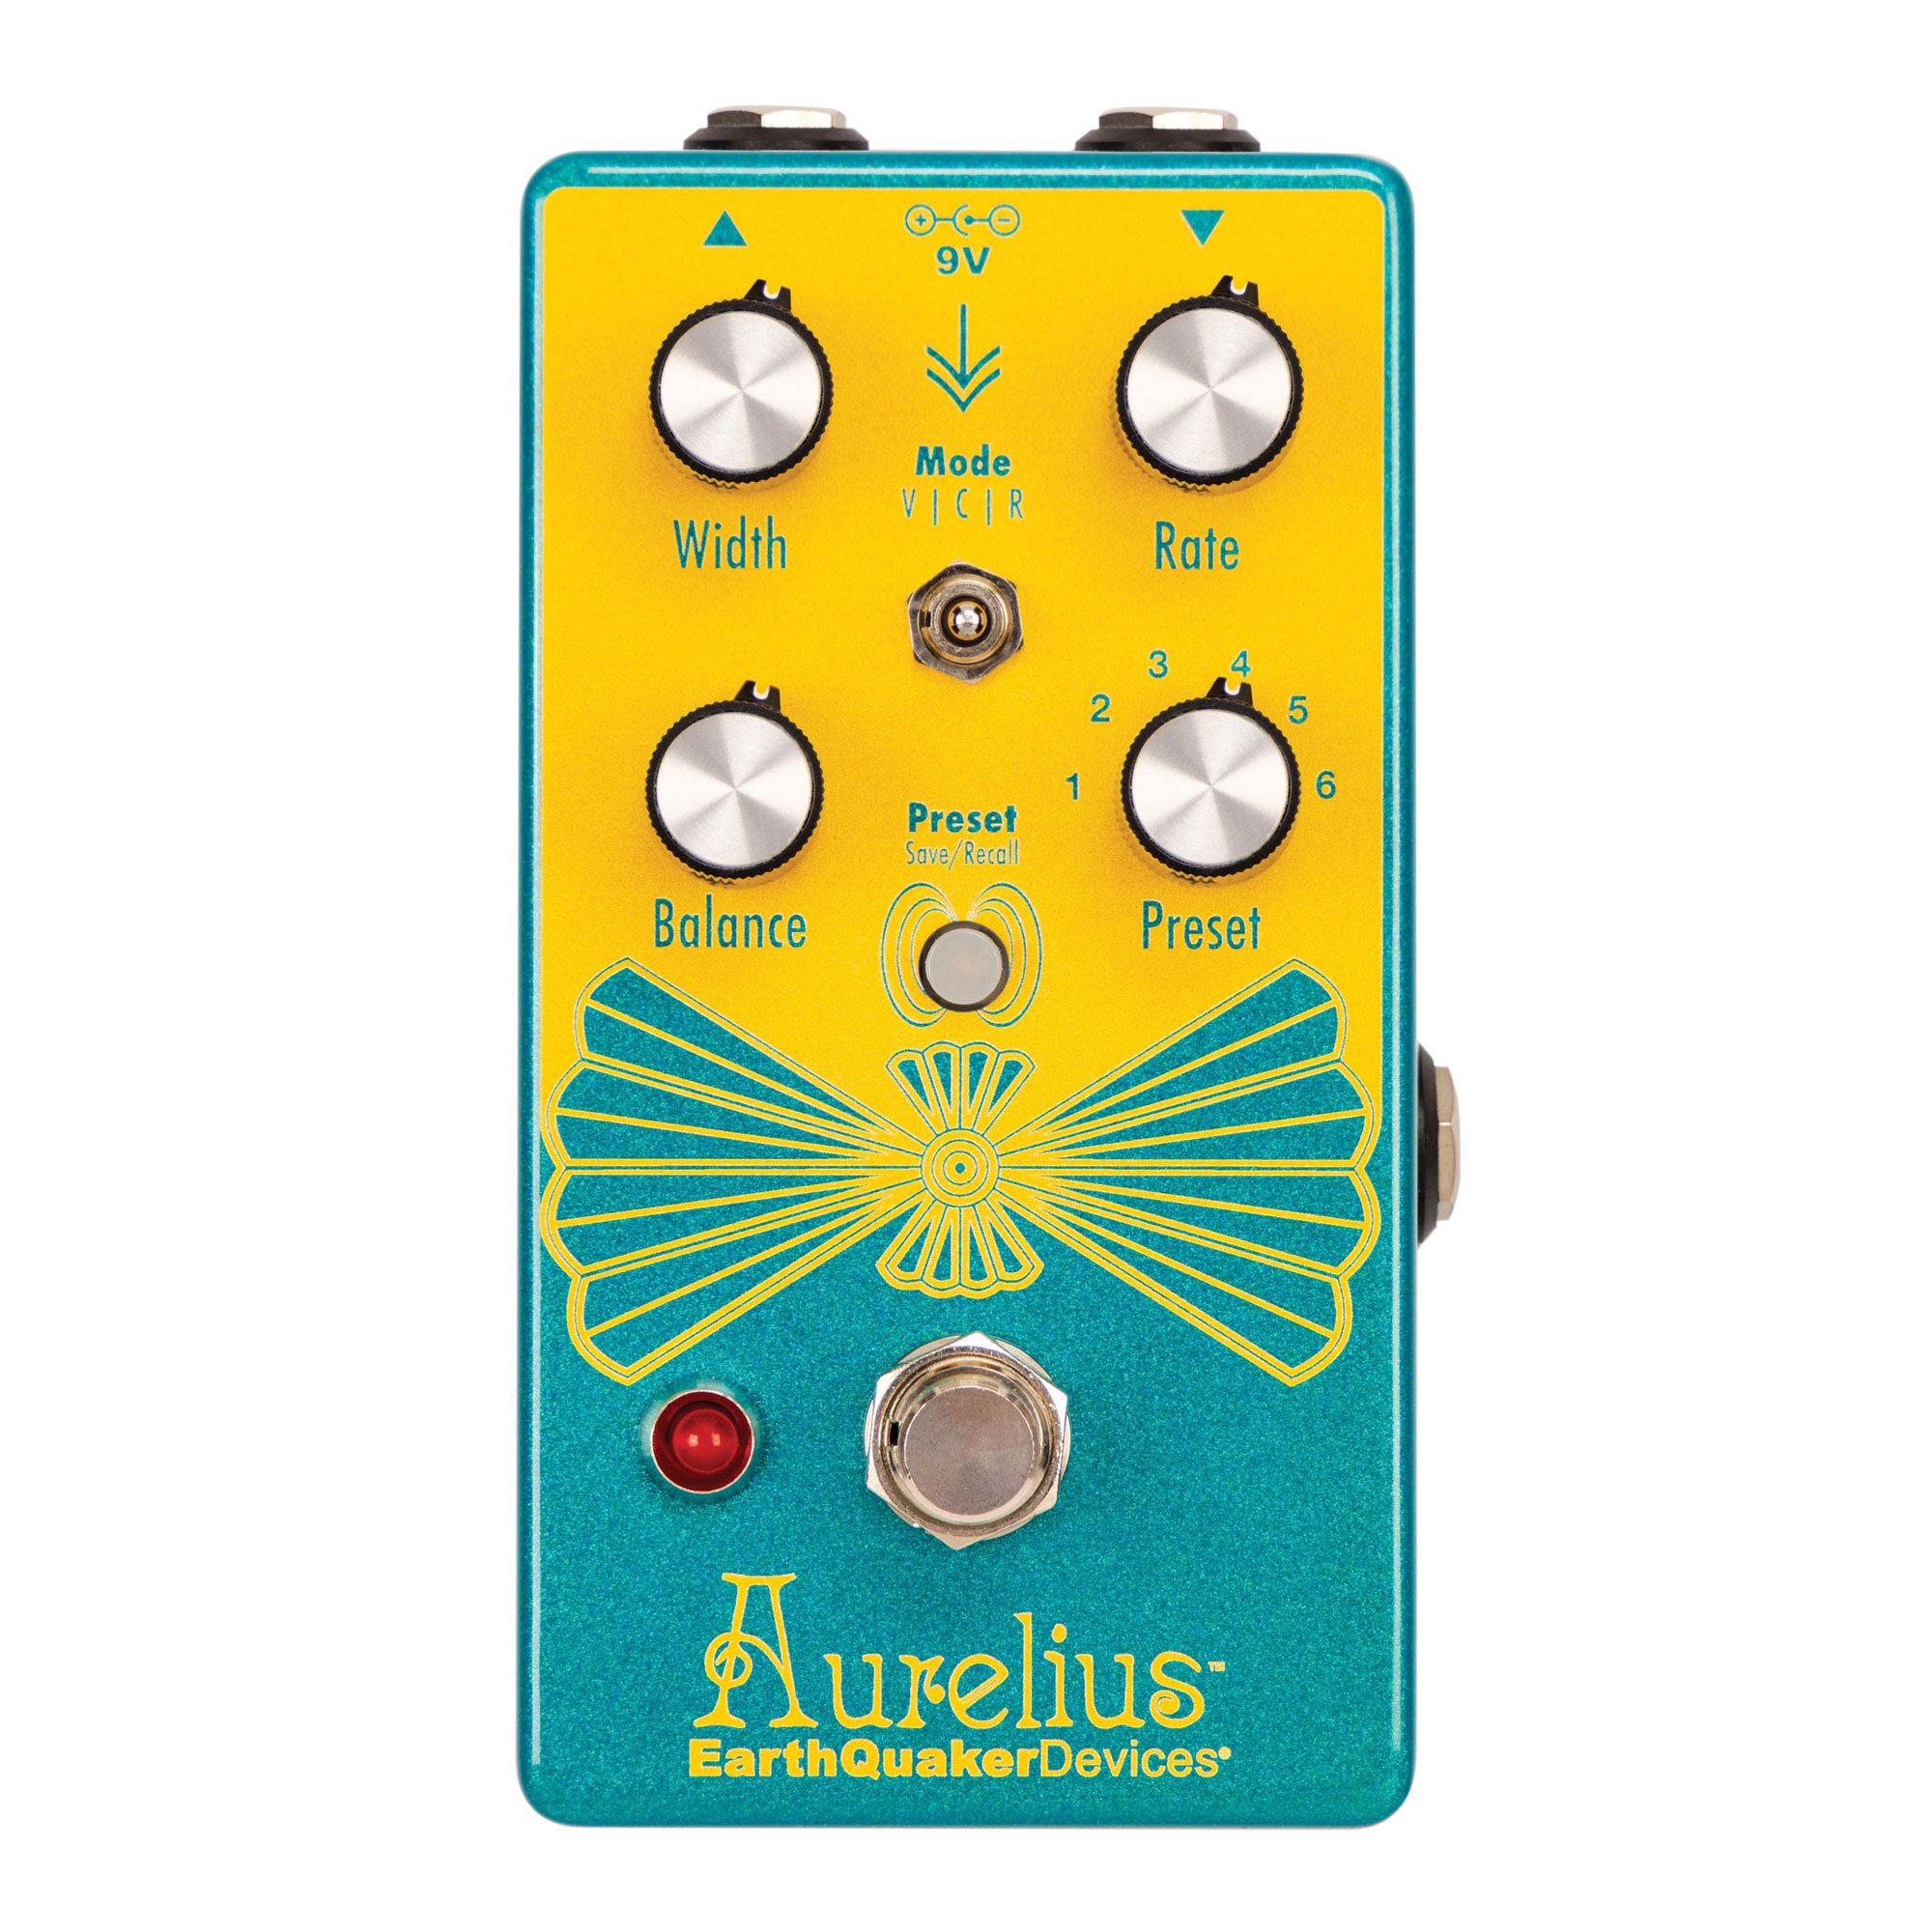 EarthQuaker devices